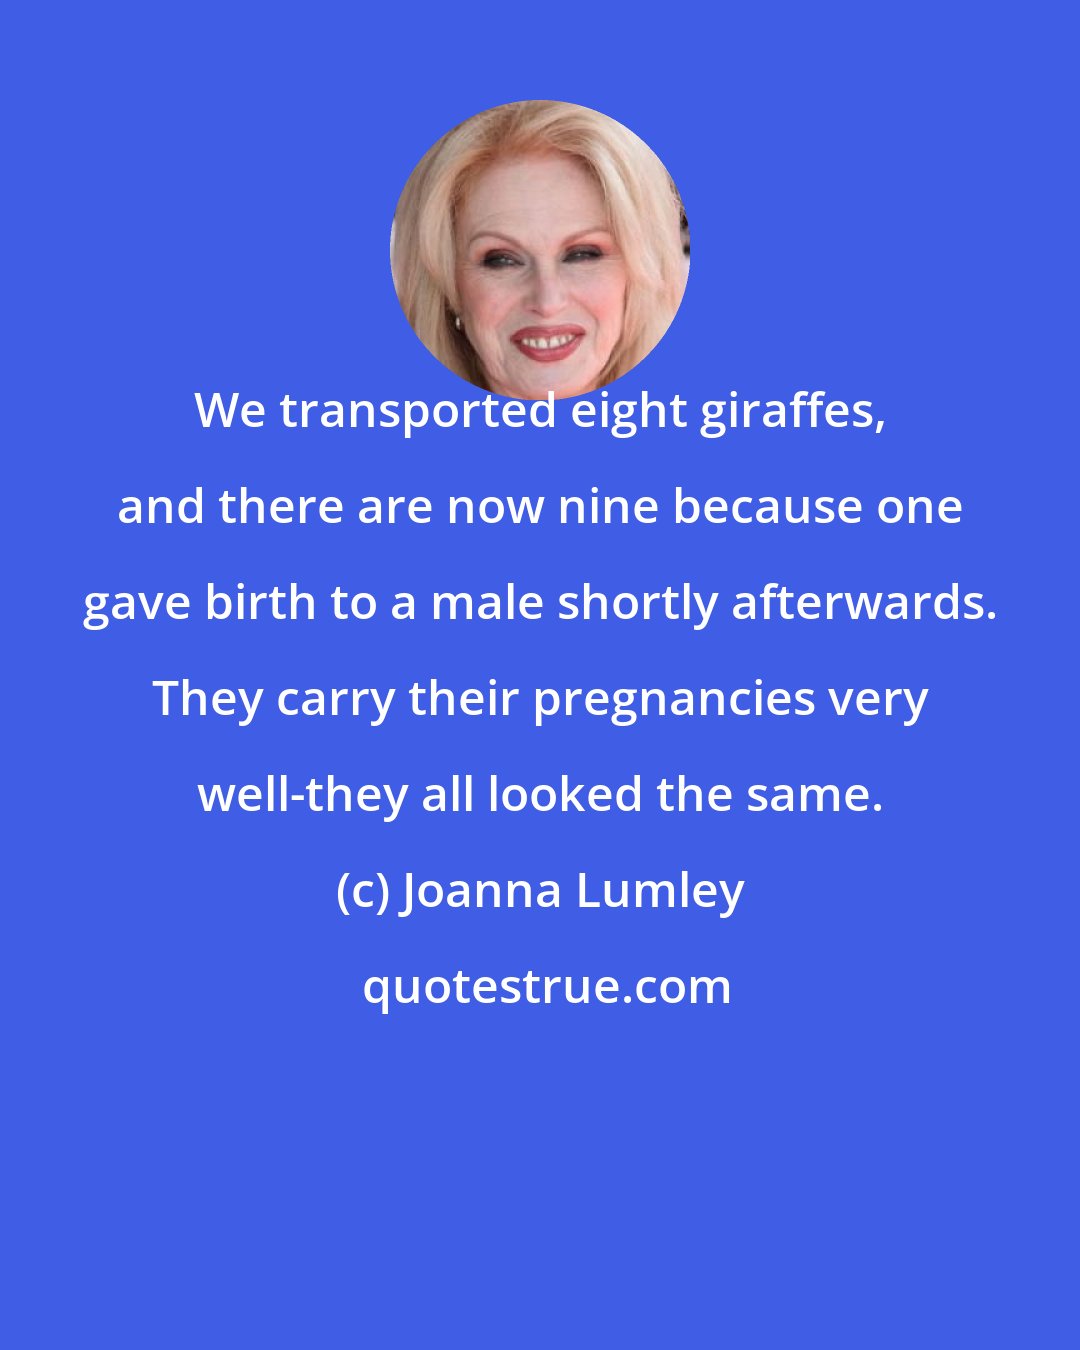 Joanna Lumley: We transported eight giraffes, and there are now nine because one gave birth to a male shortly afterwards. They carry their pregnancies very well-they all looked the same.